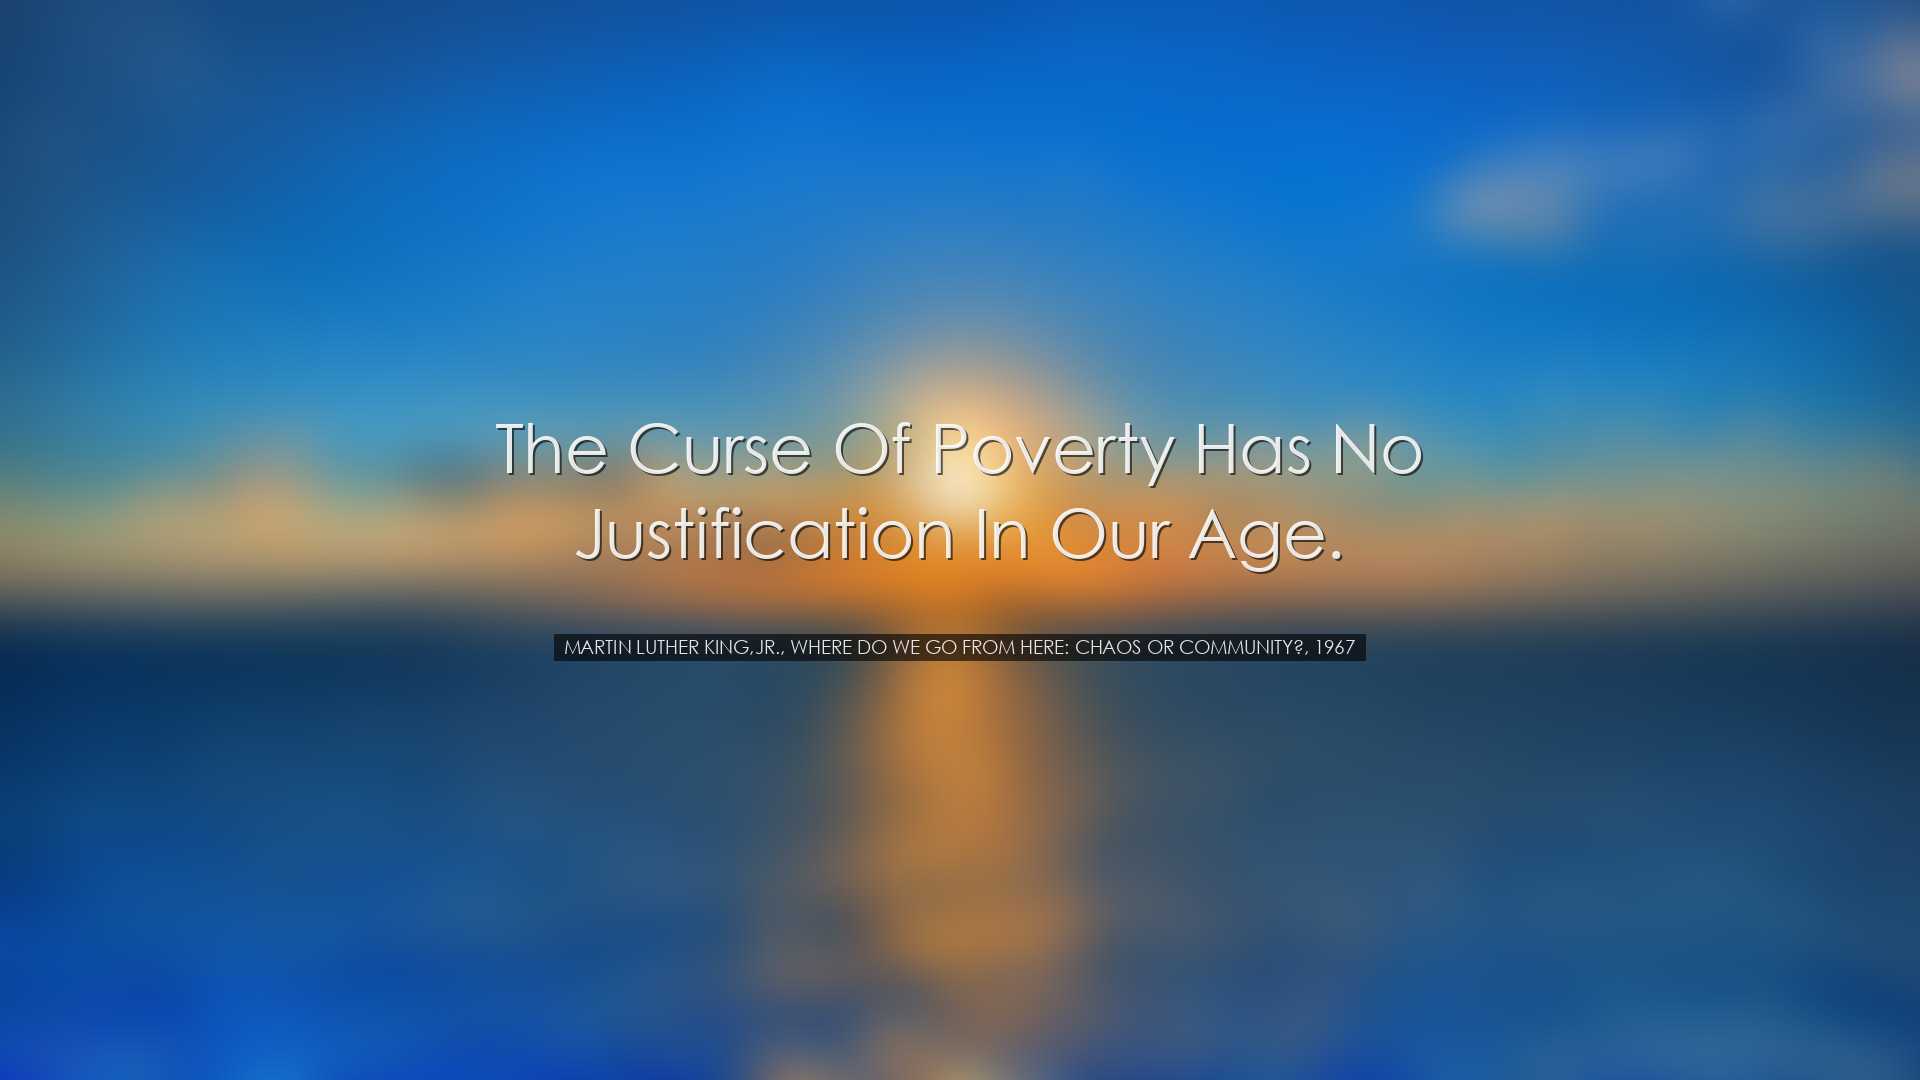 The curse of poverty has no justification in our age. - Martin Lut